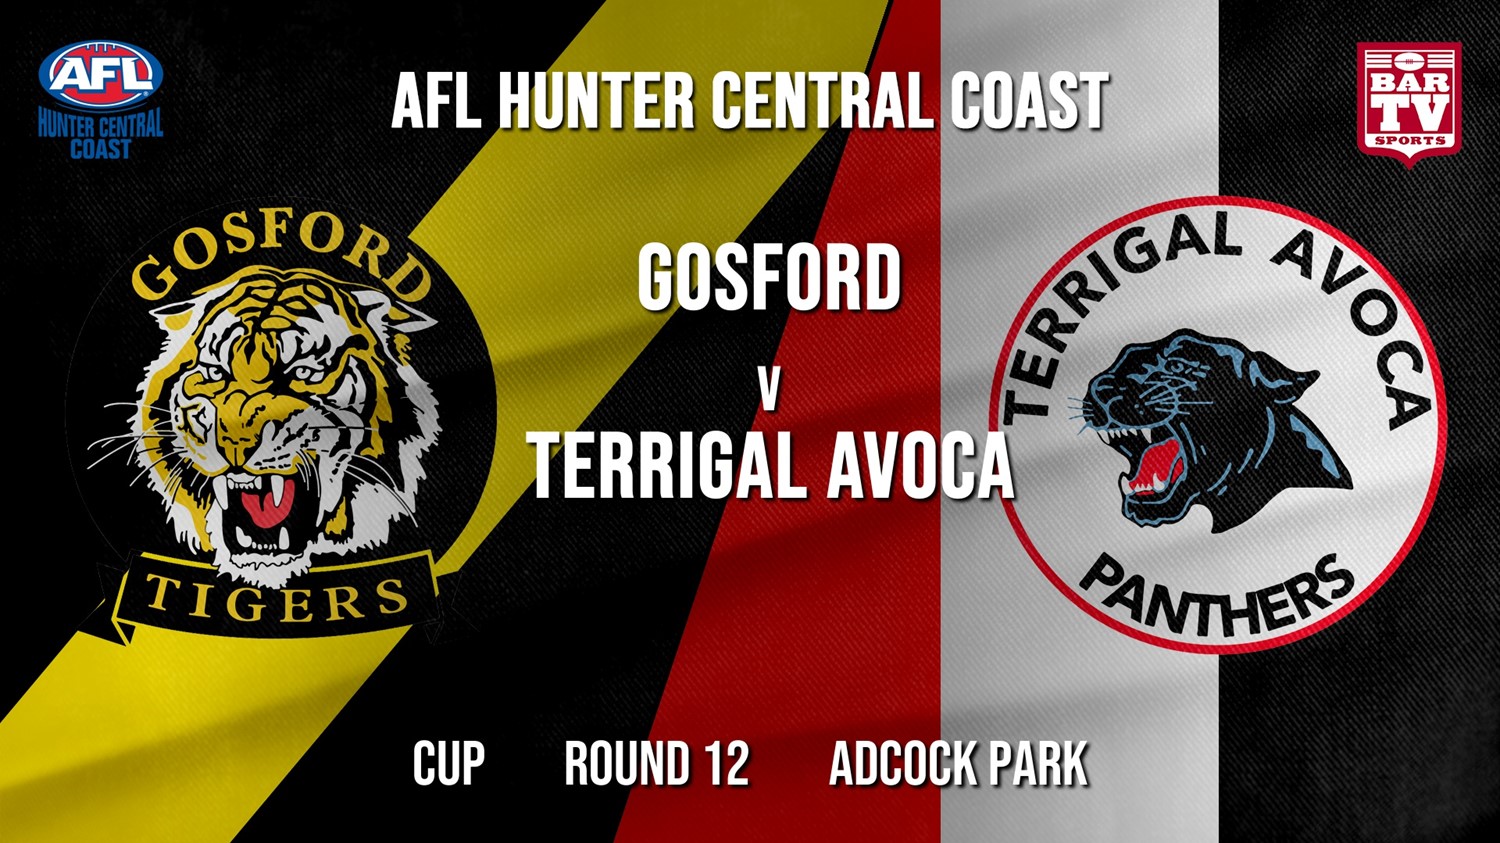 AFL HCC Round 12 - Cup - Gosford Tigers v Terrigal Avoca Panthers Minigame Slate Image